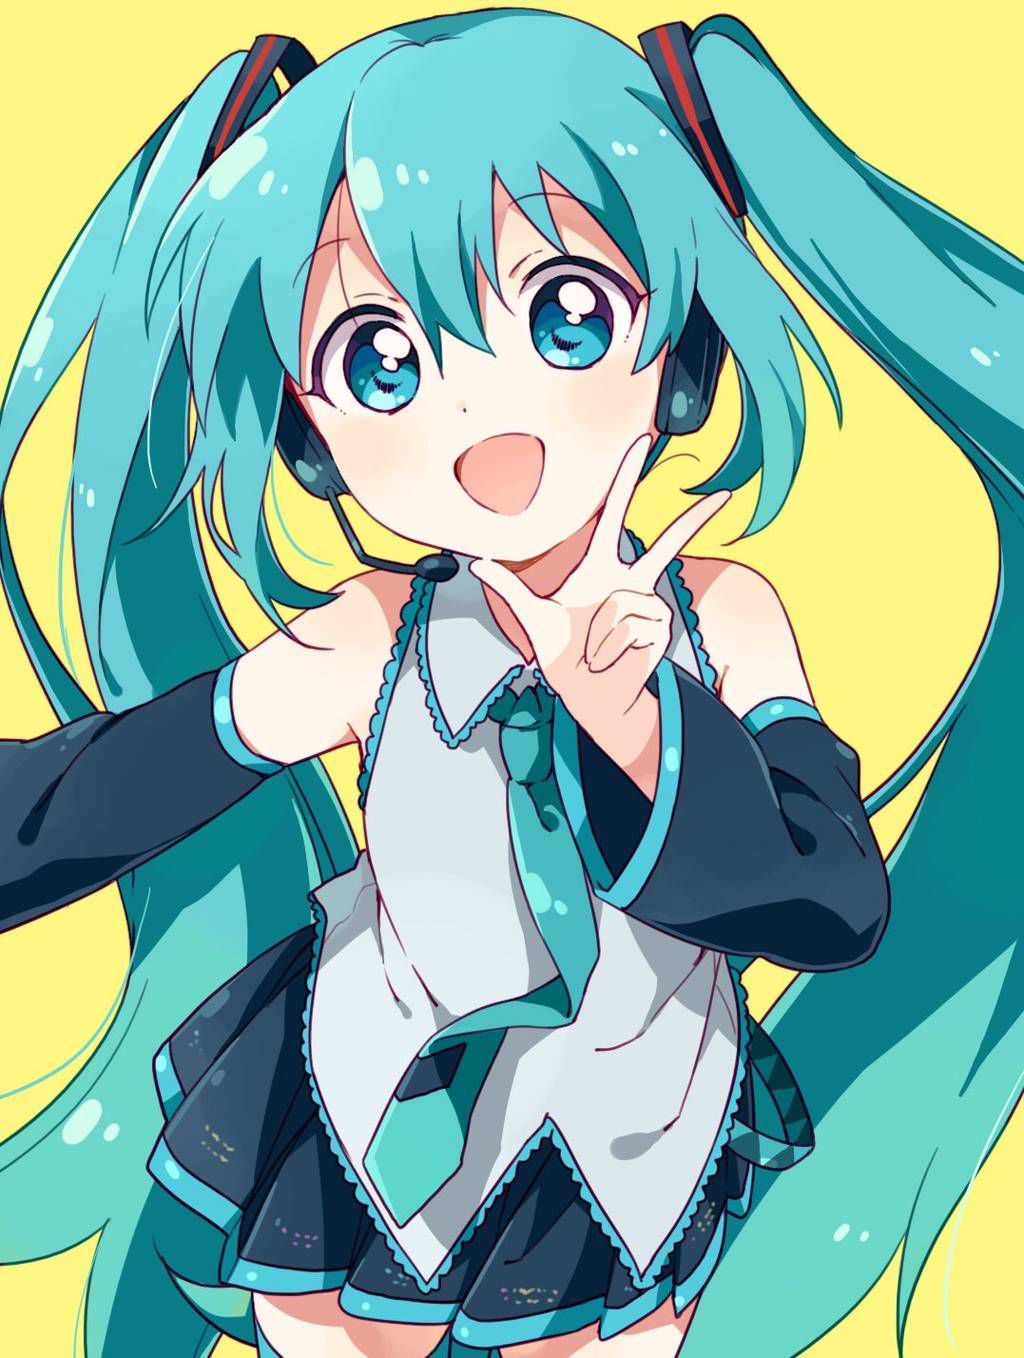 Vocaloid Image that is becoming the Iki face of Hatsune Miku 8